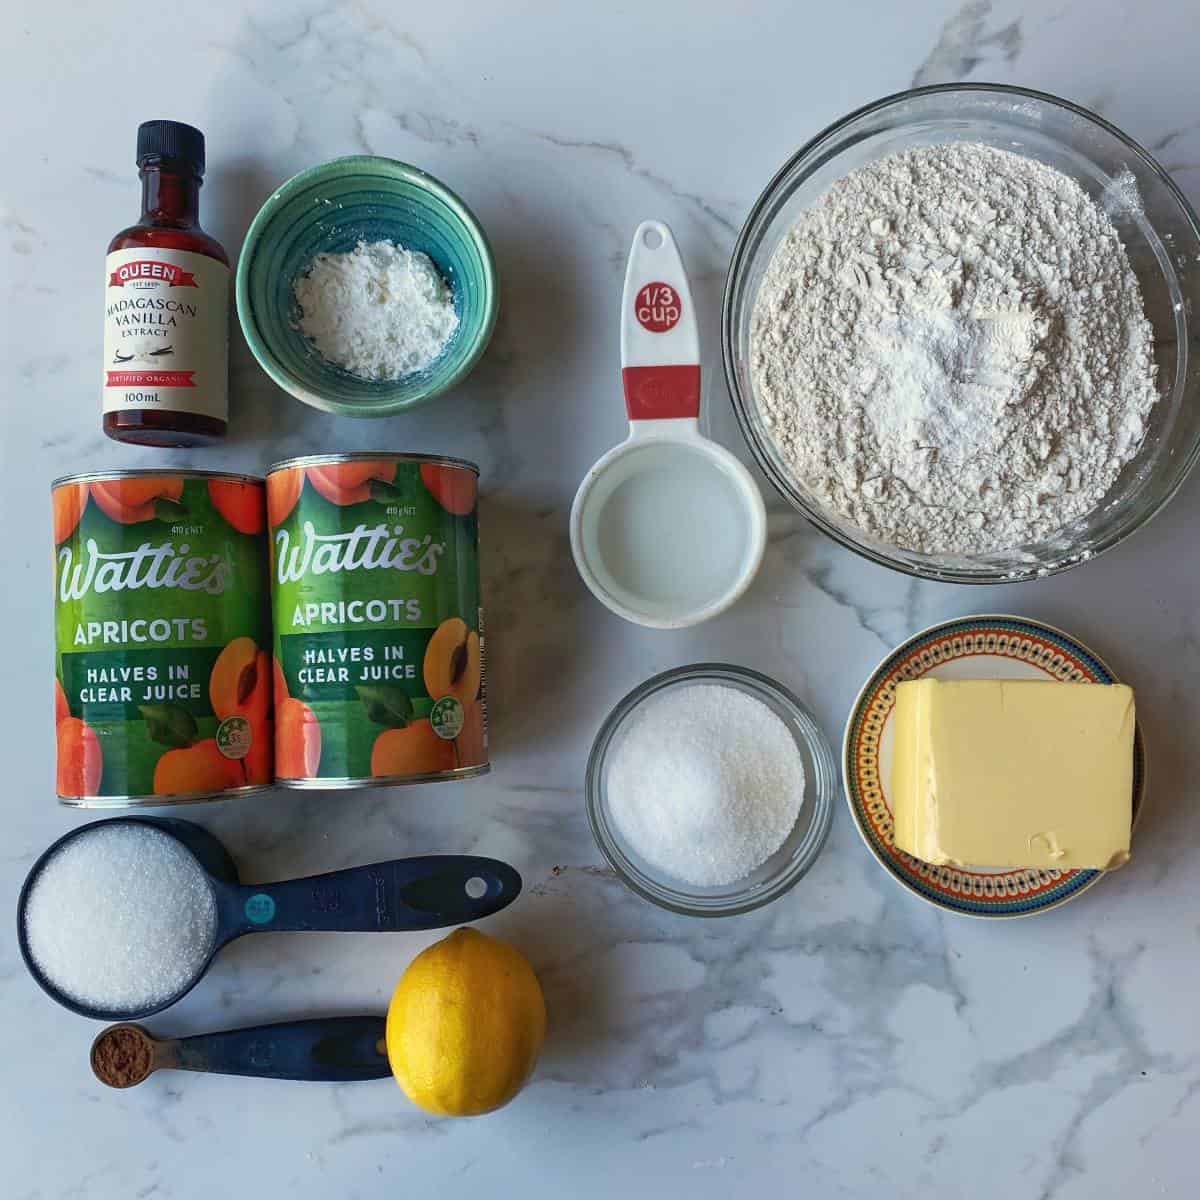 The ingredients for apricot short crust pie on a marble bench